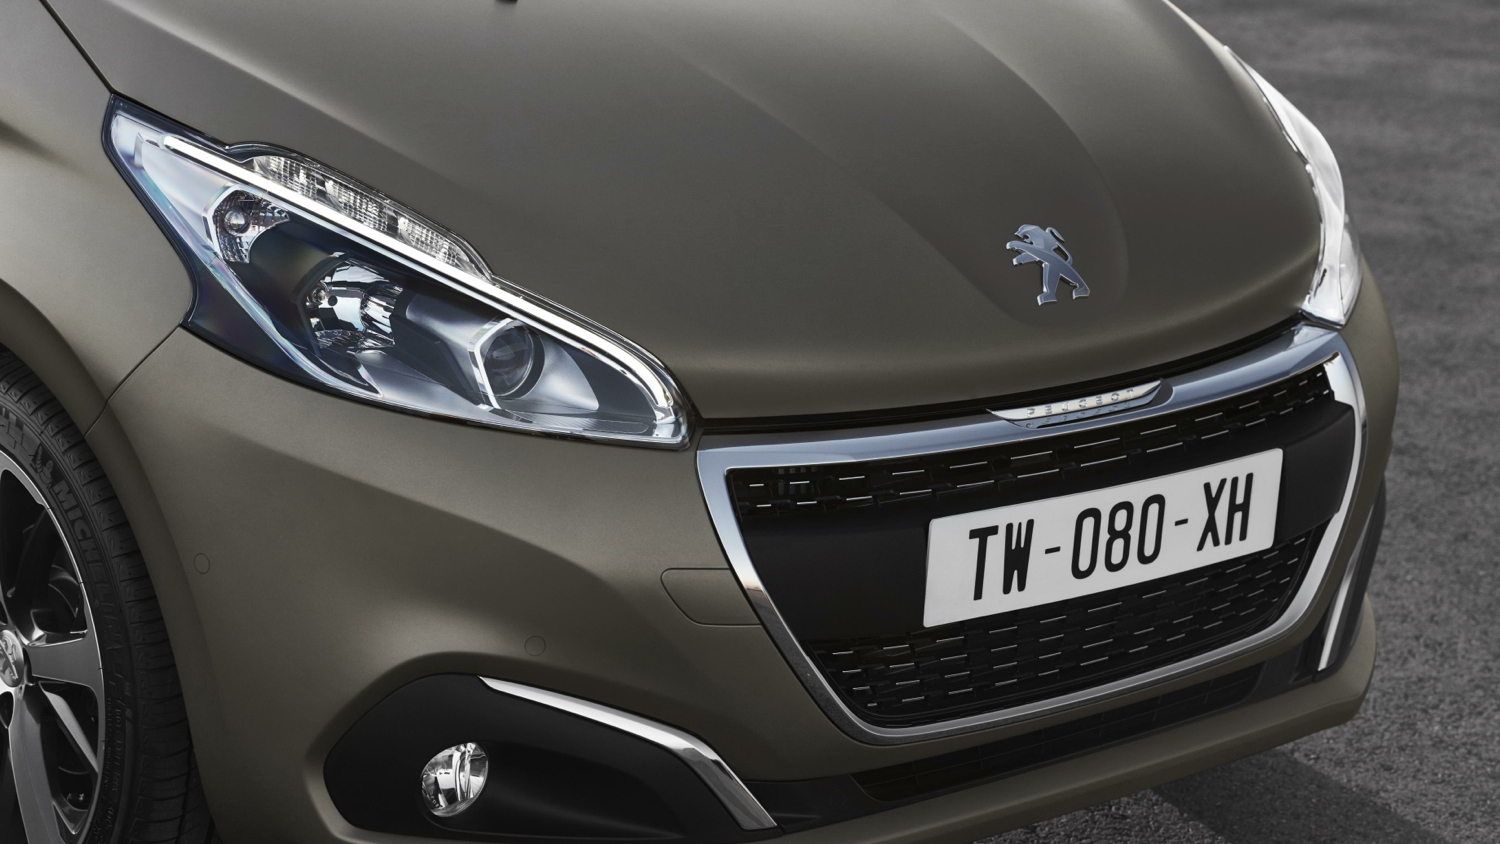 2015 Peugeot 208 with textured paint finish